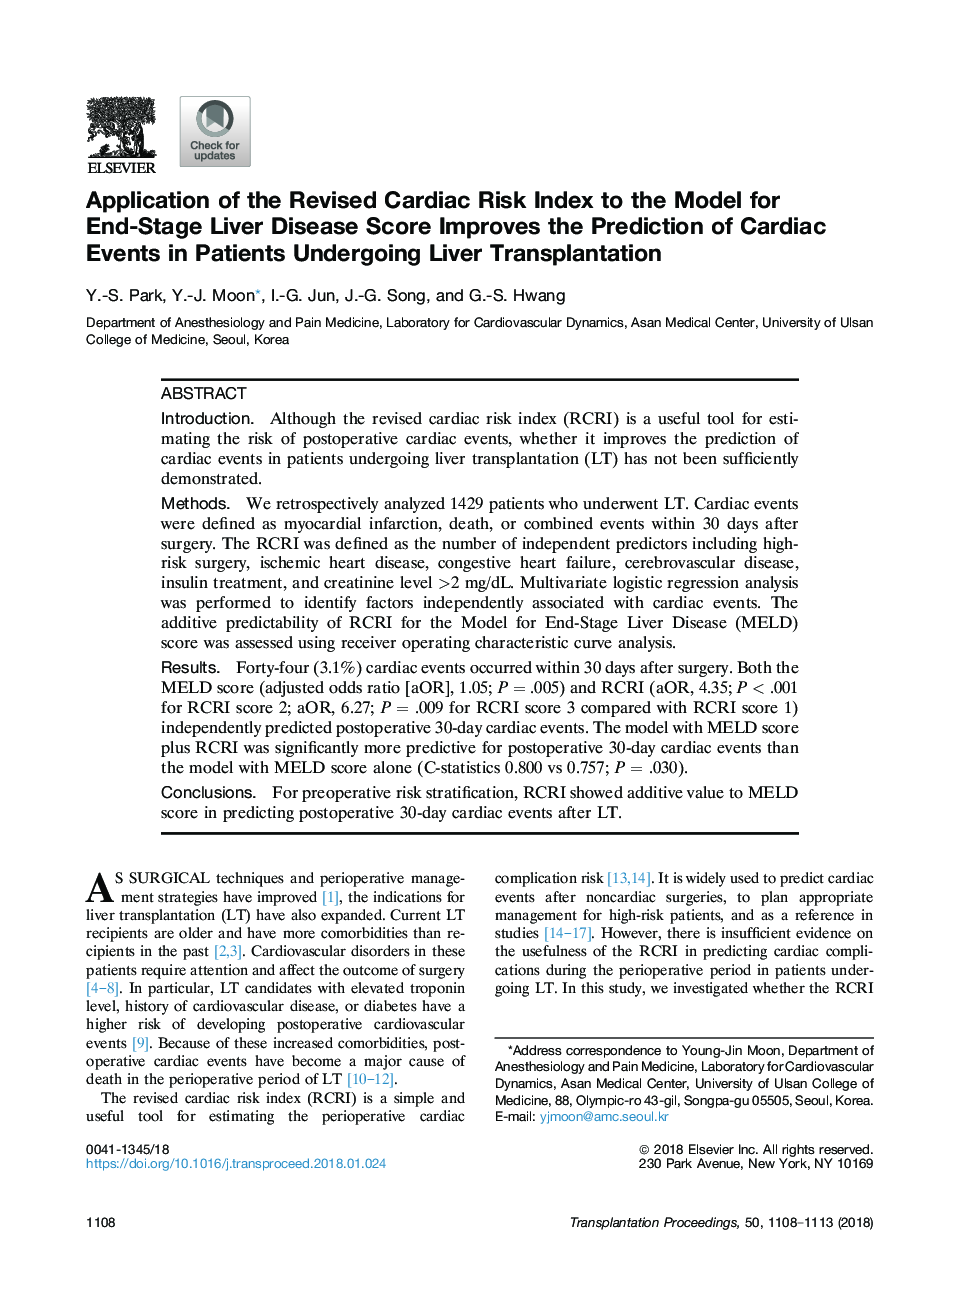 Application of the Revised Cardiac Risk Index to the Model for End-Stage Liver Disease Score Improves the Prediction of Cardiac Events in Patients Undergoing Liver Transplantation